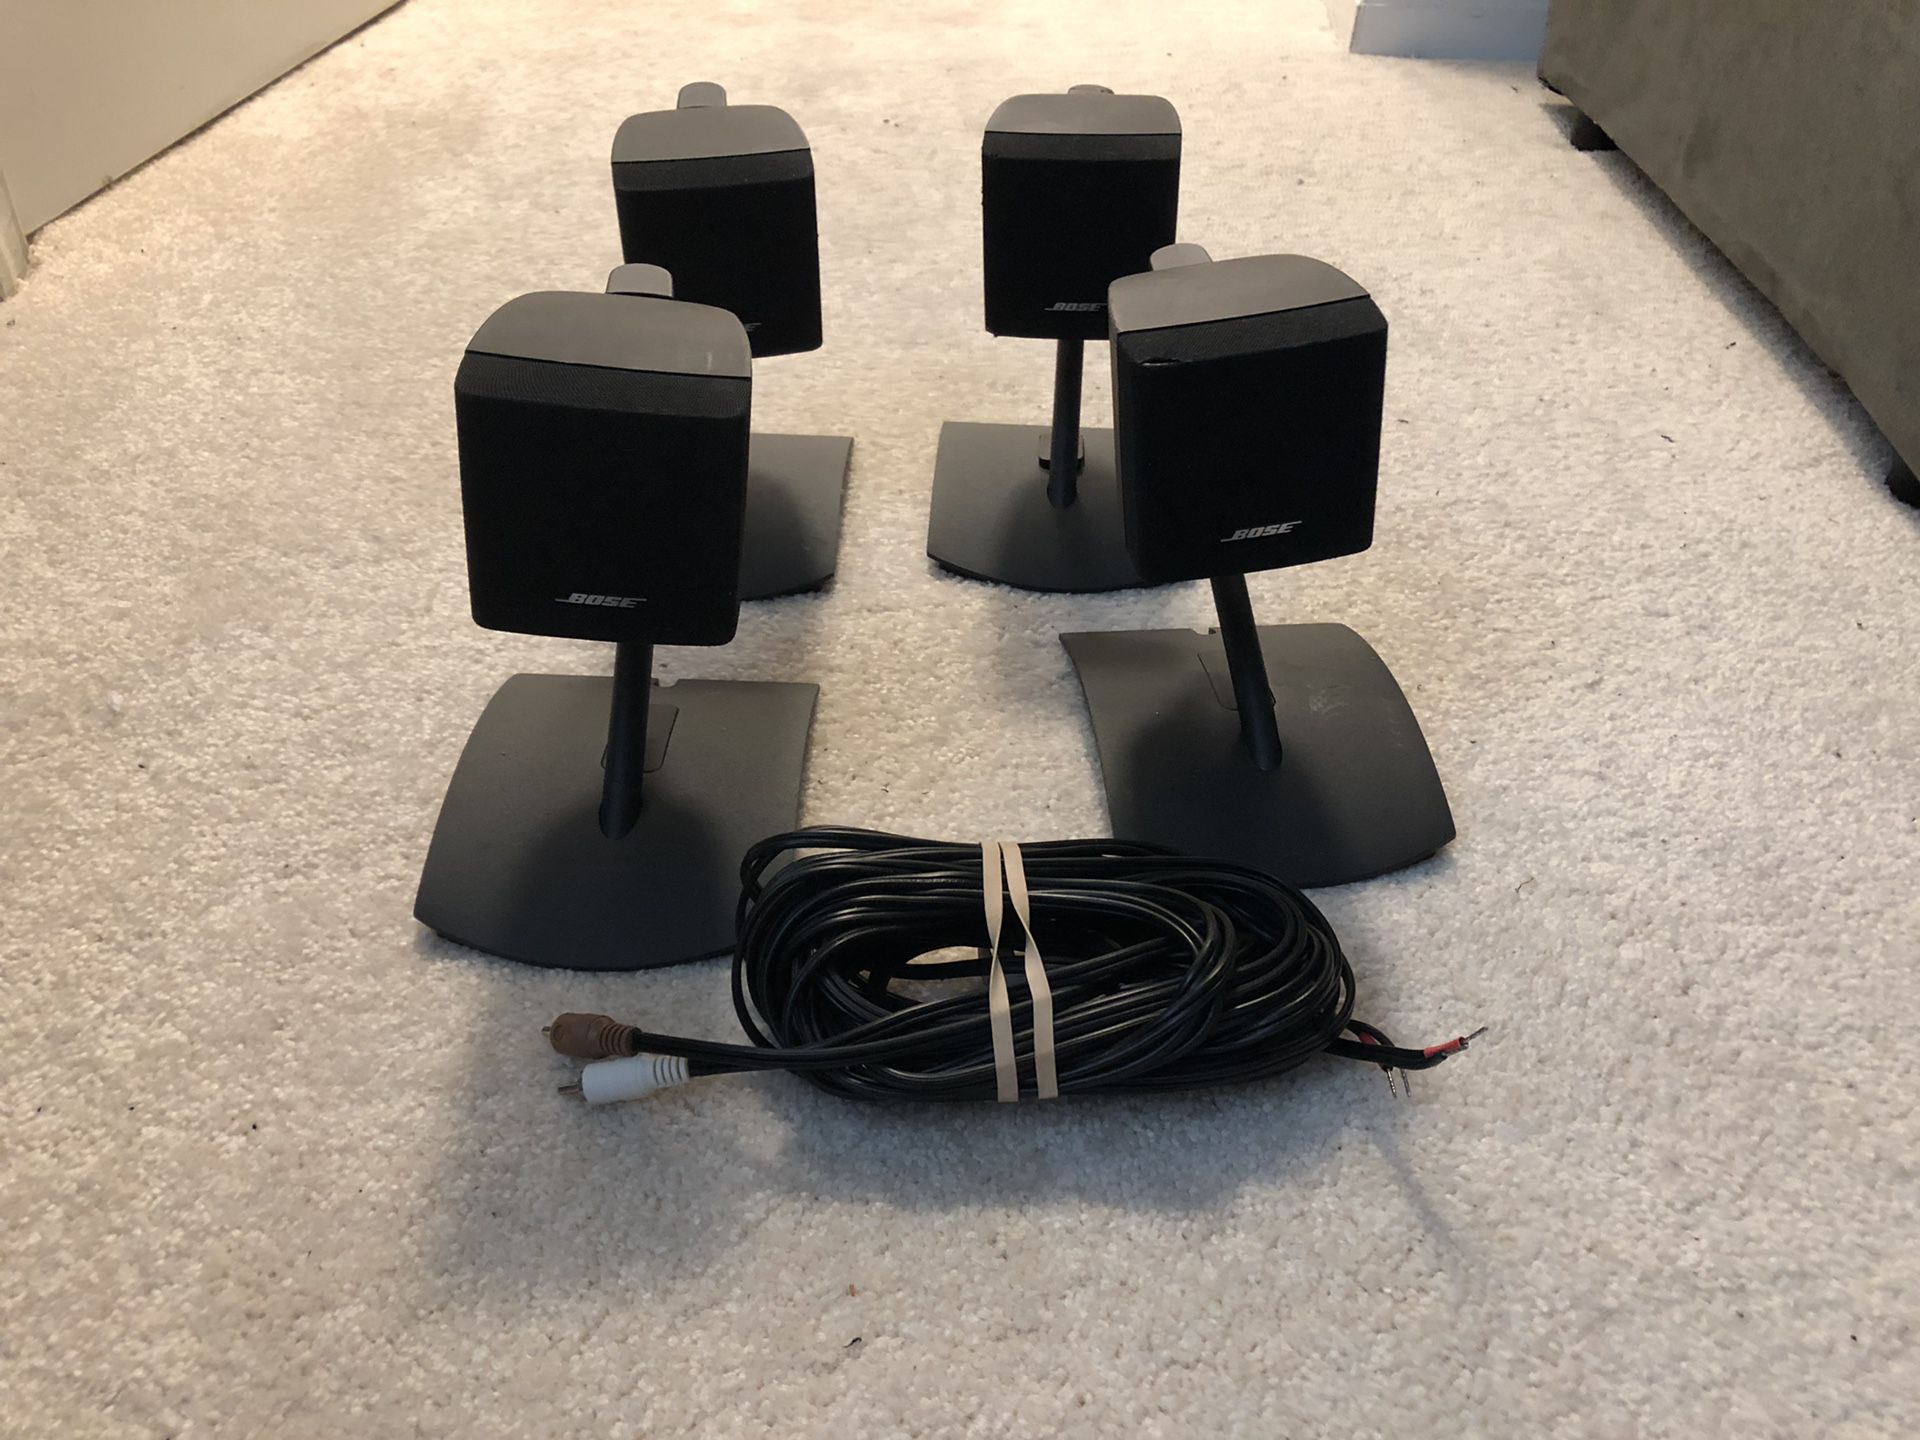 Bose single Speakers with stand and two wires